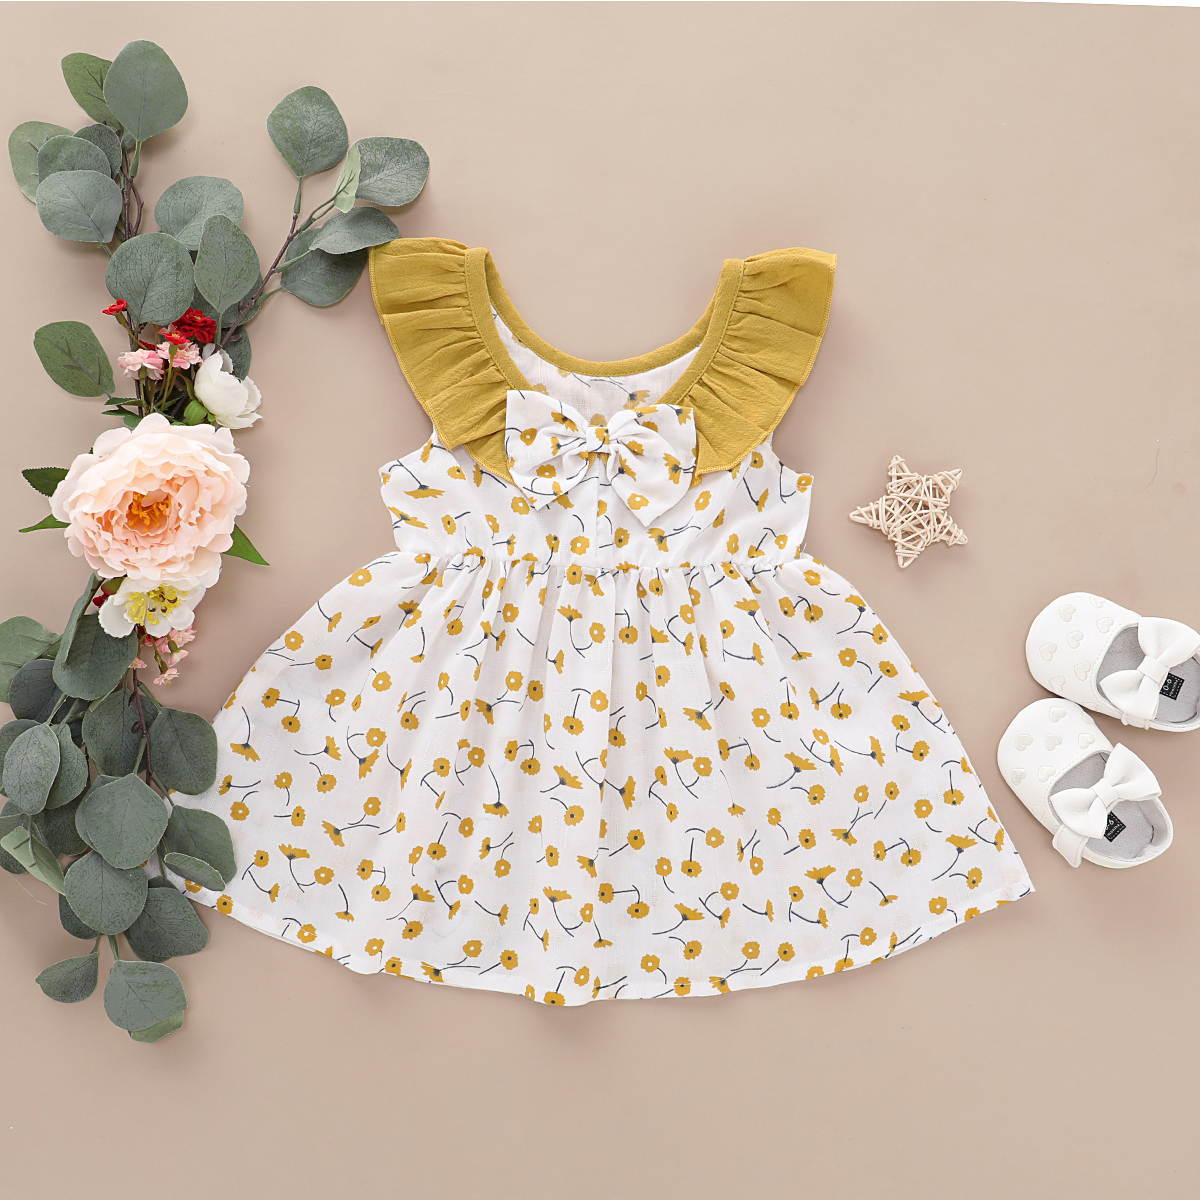 Baby / Toddler Flounced Sleeve Floral Dress